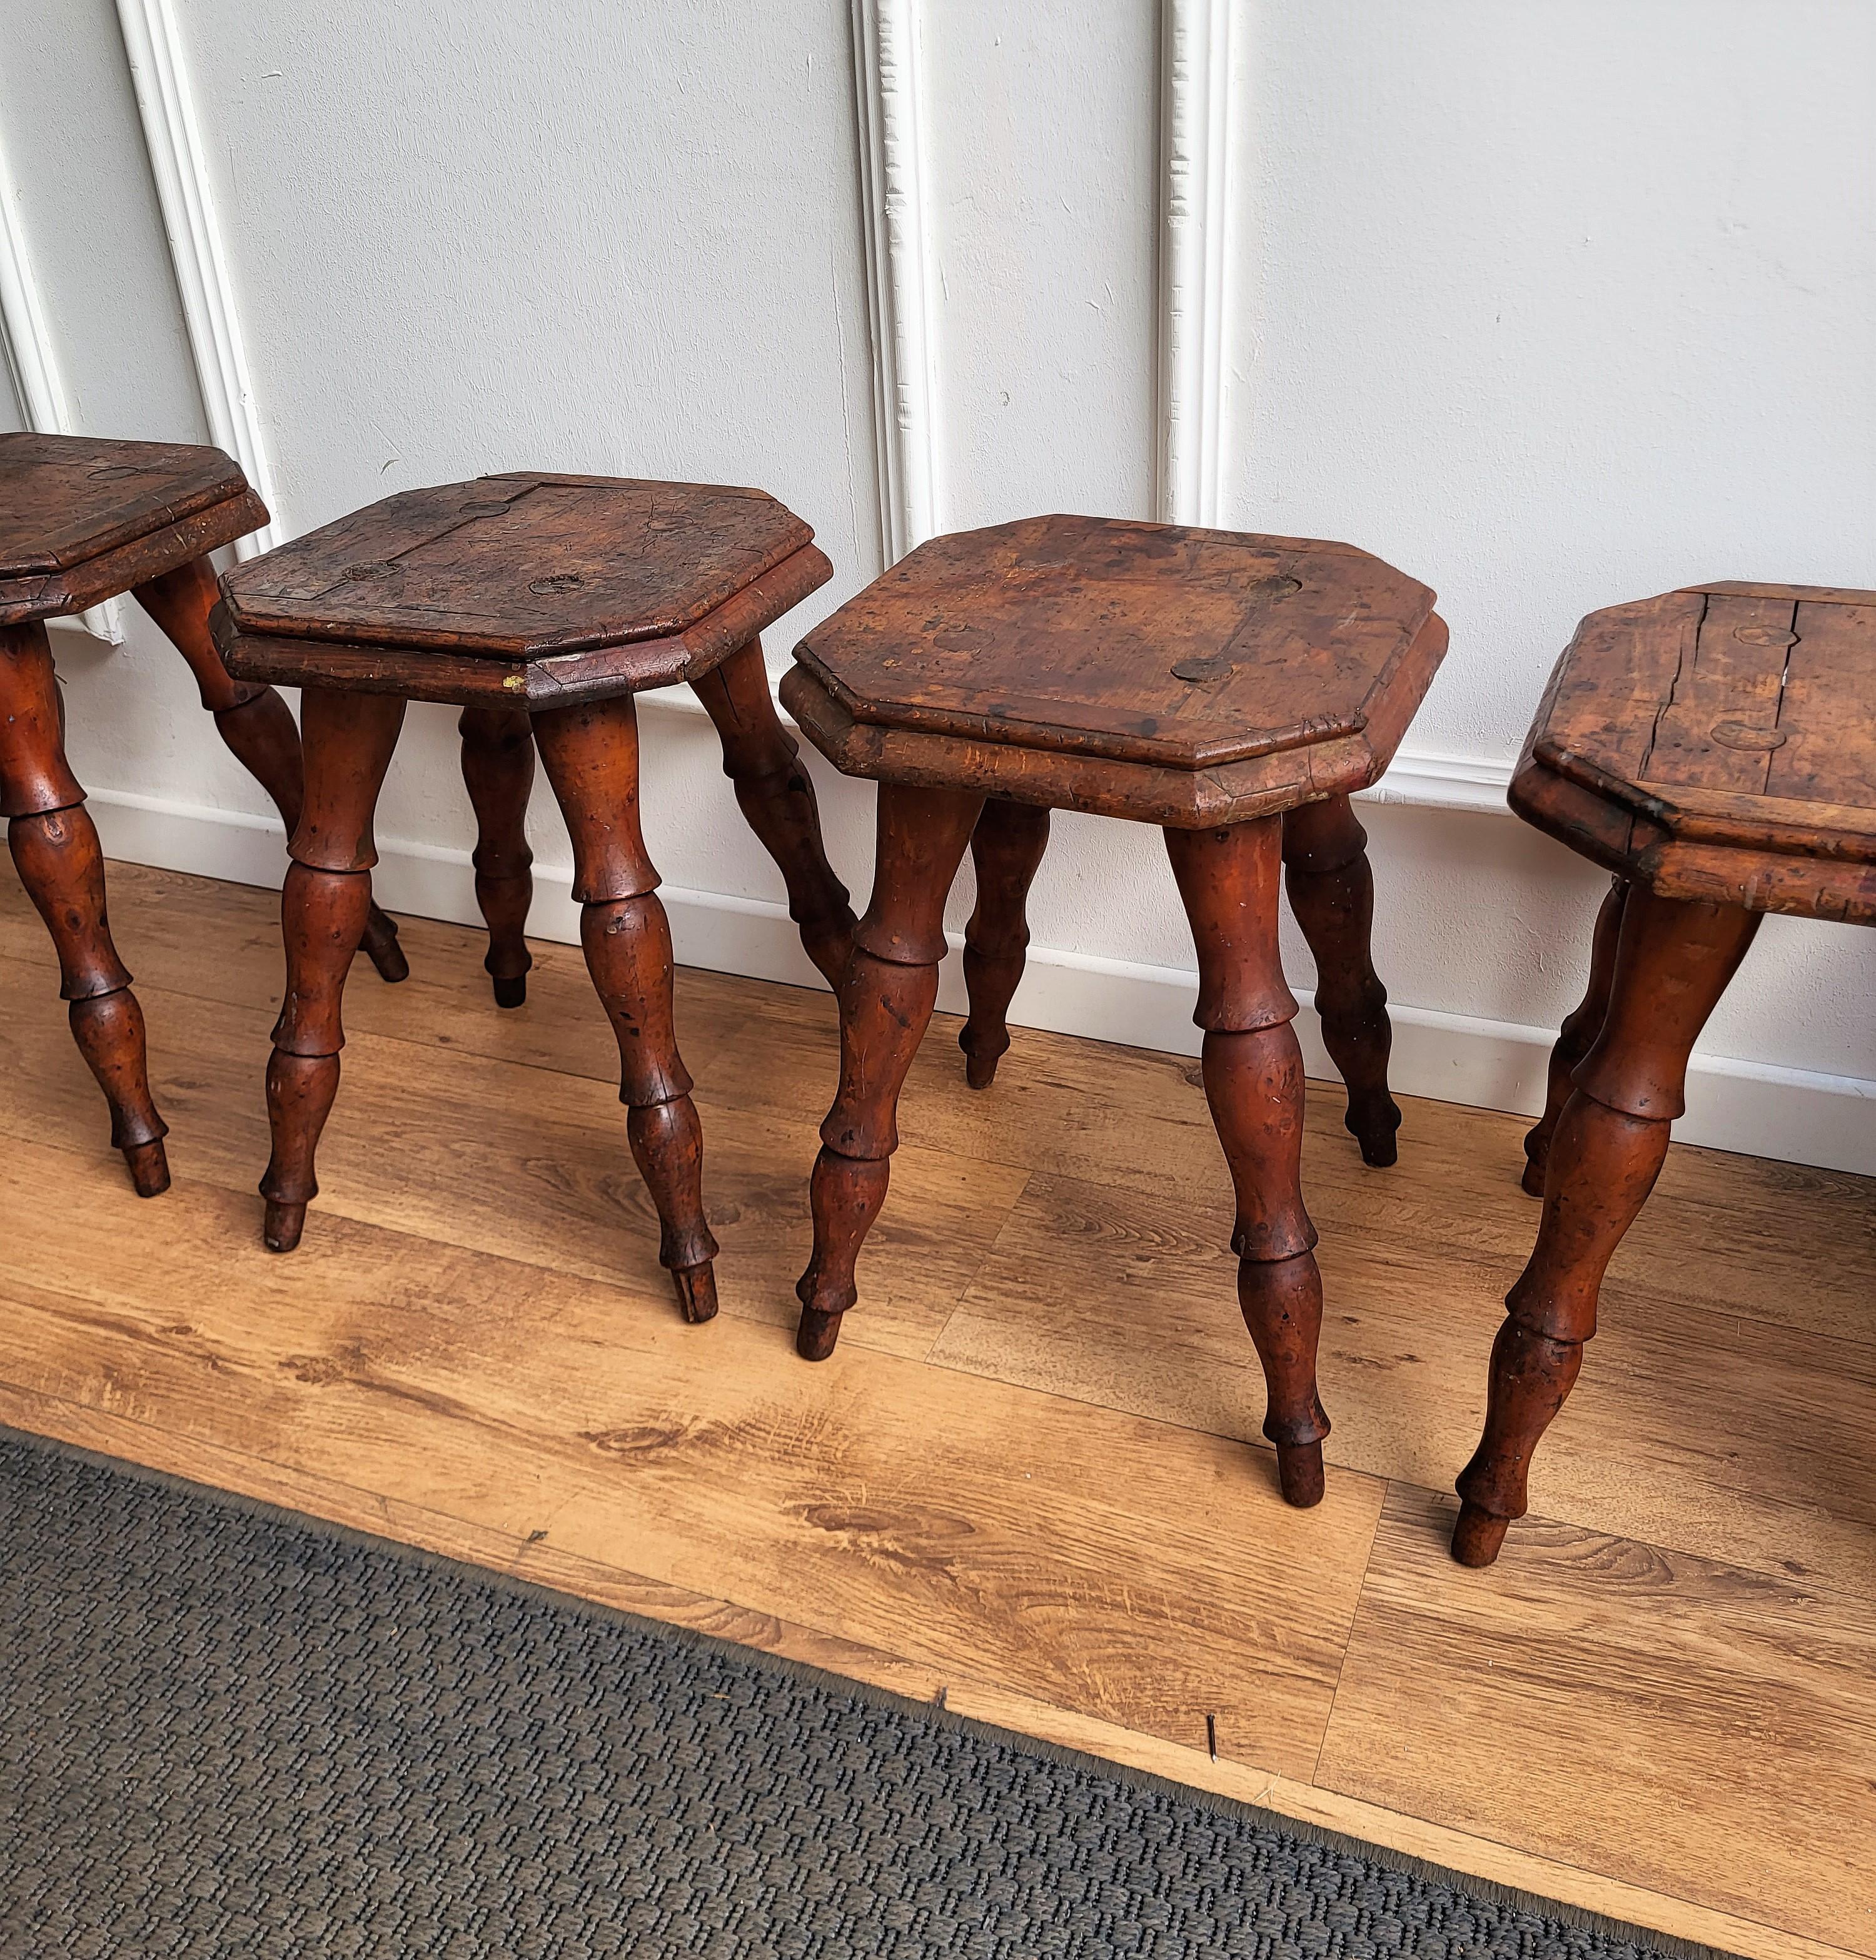 20th Century Set of 4 Antique Italian Walnut Side Tables or Stools with Carved Turned Legs For Sale